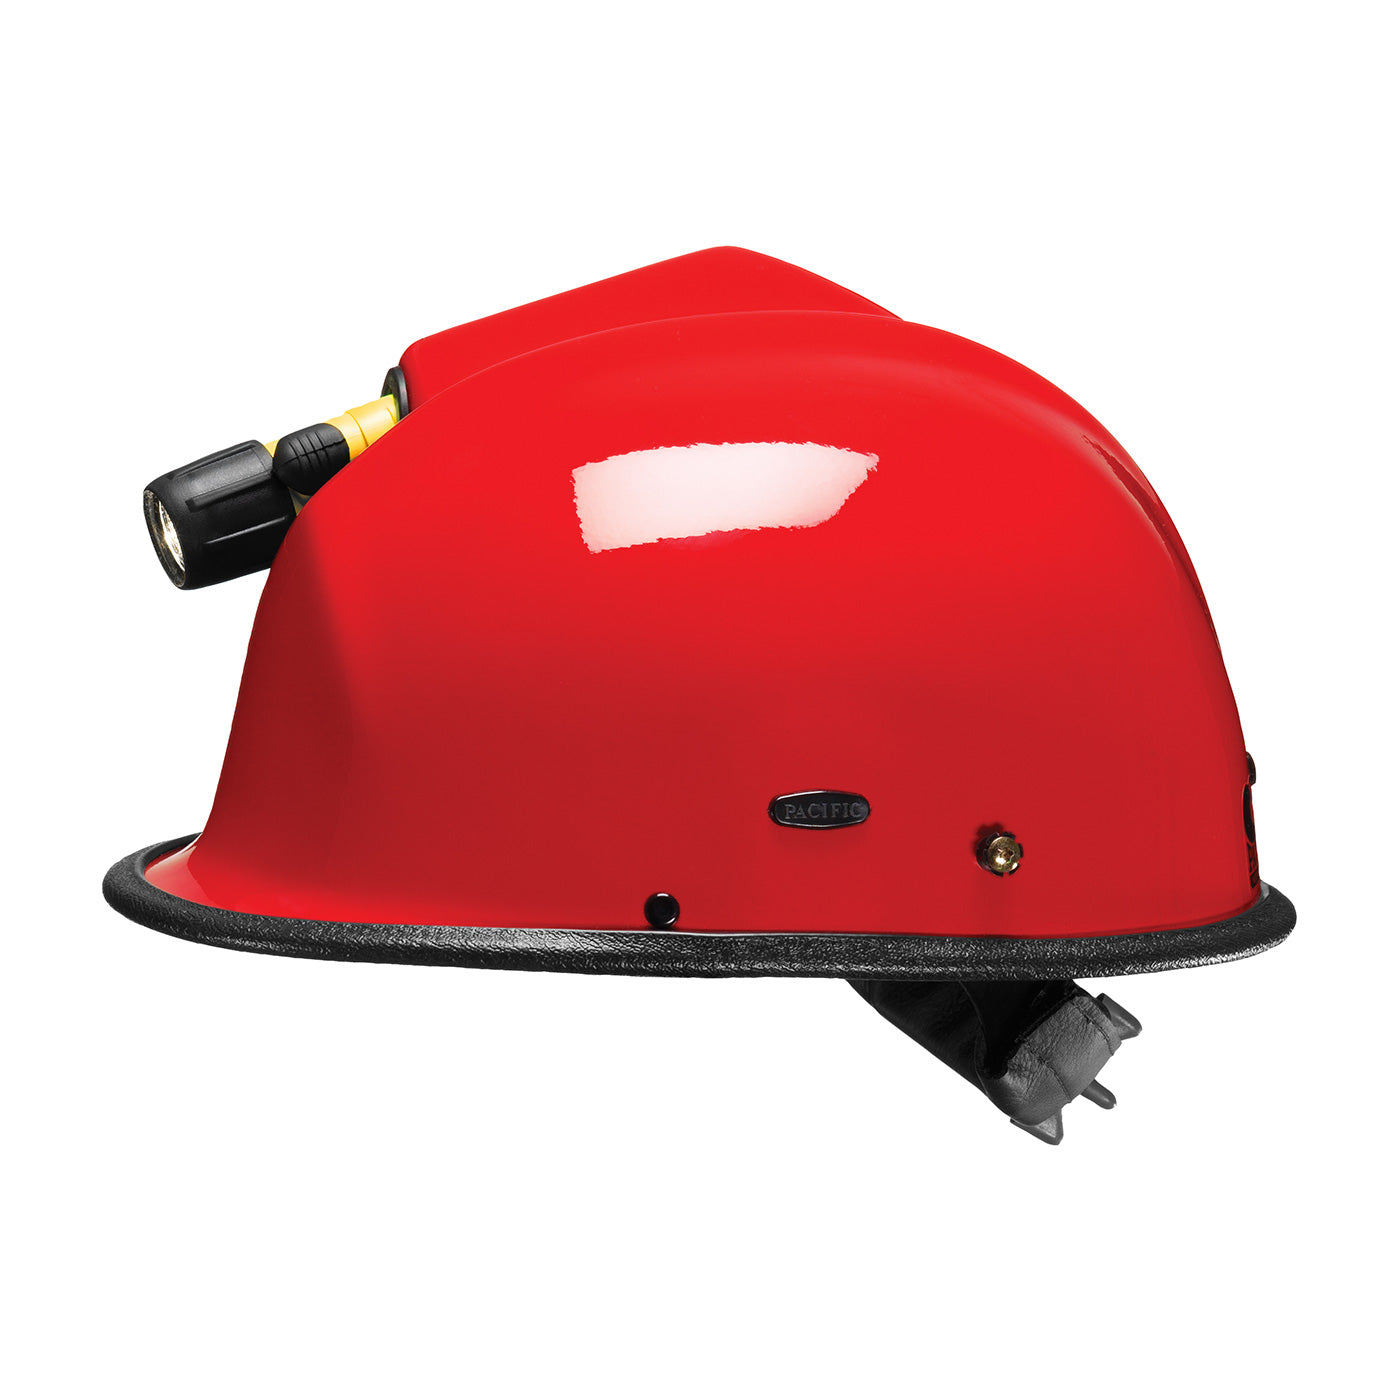 R3T Kiwi Rescue Helmet with ESS Goggle Mounts and Built-in Light Holder